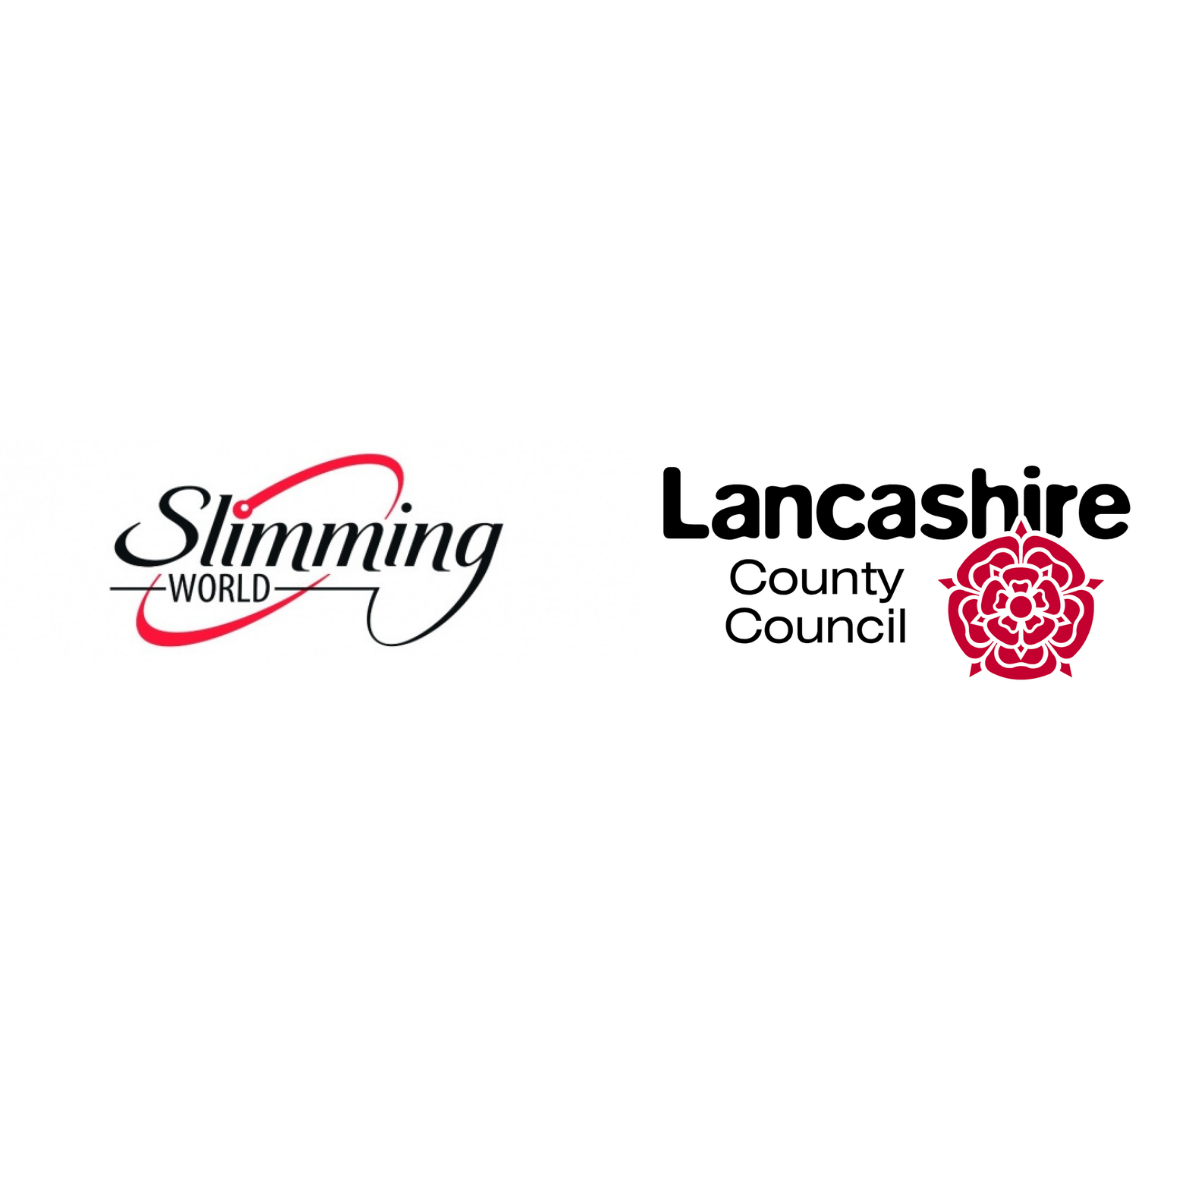 Decorative logo of slimming world and Lancashire County Council